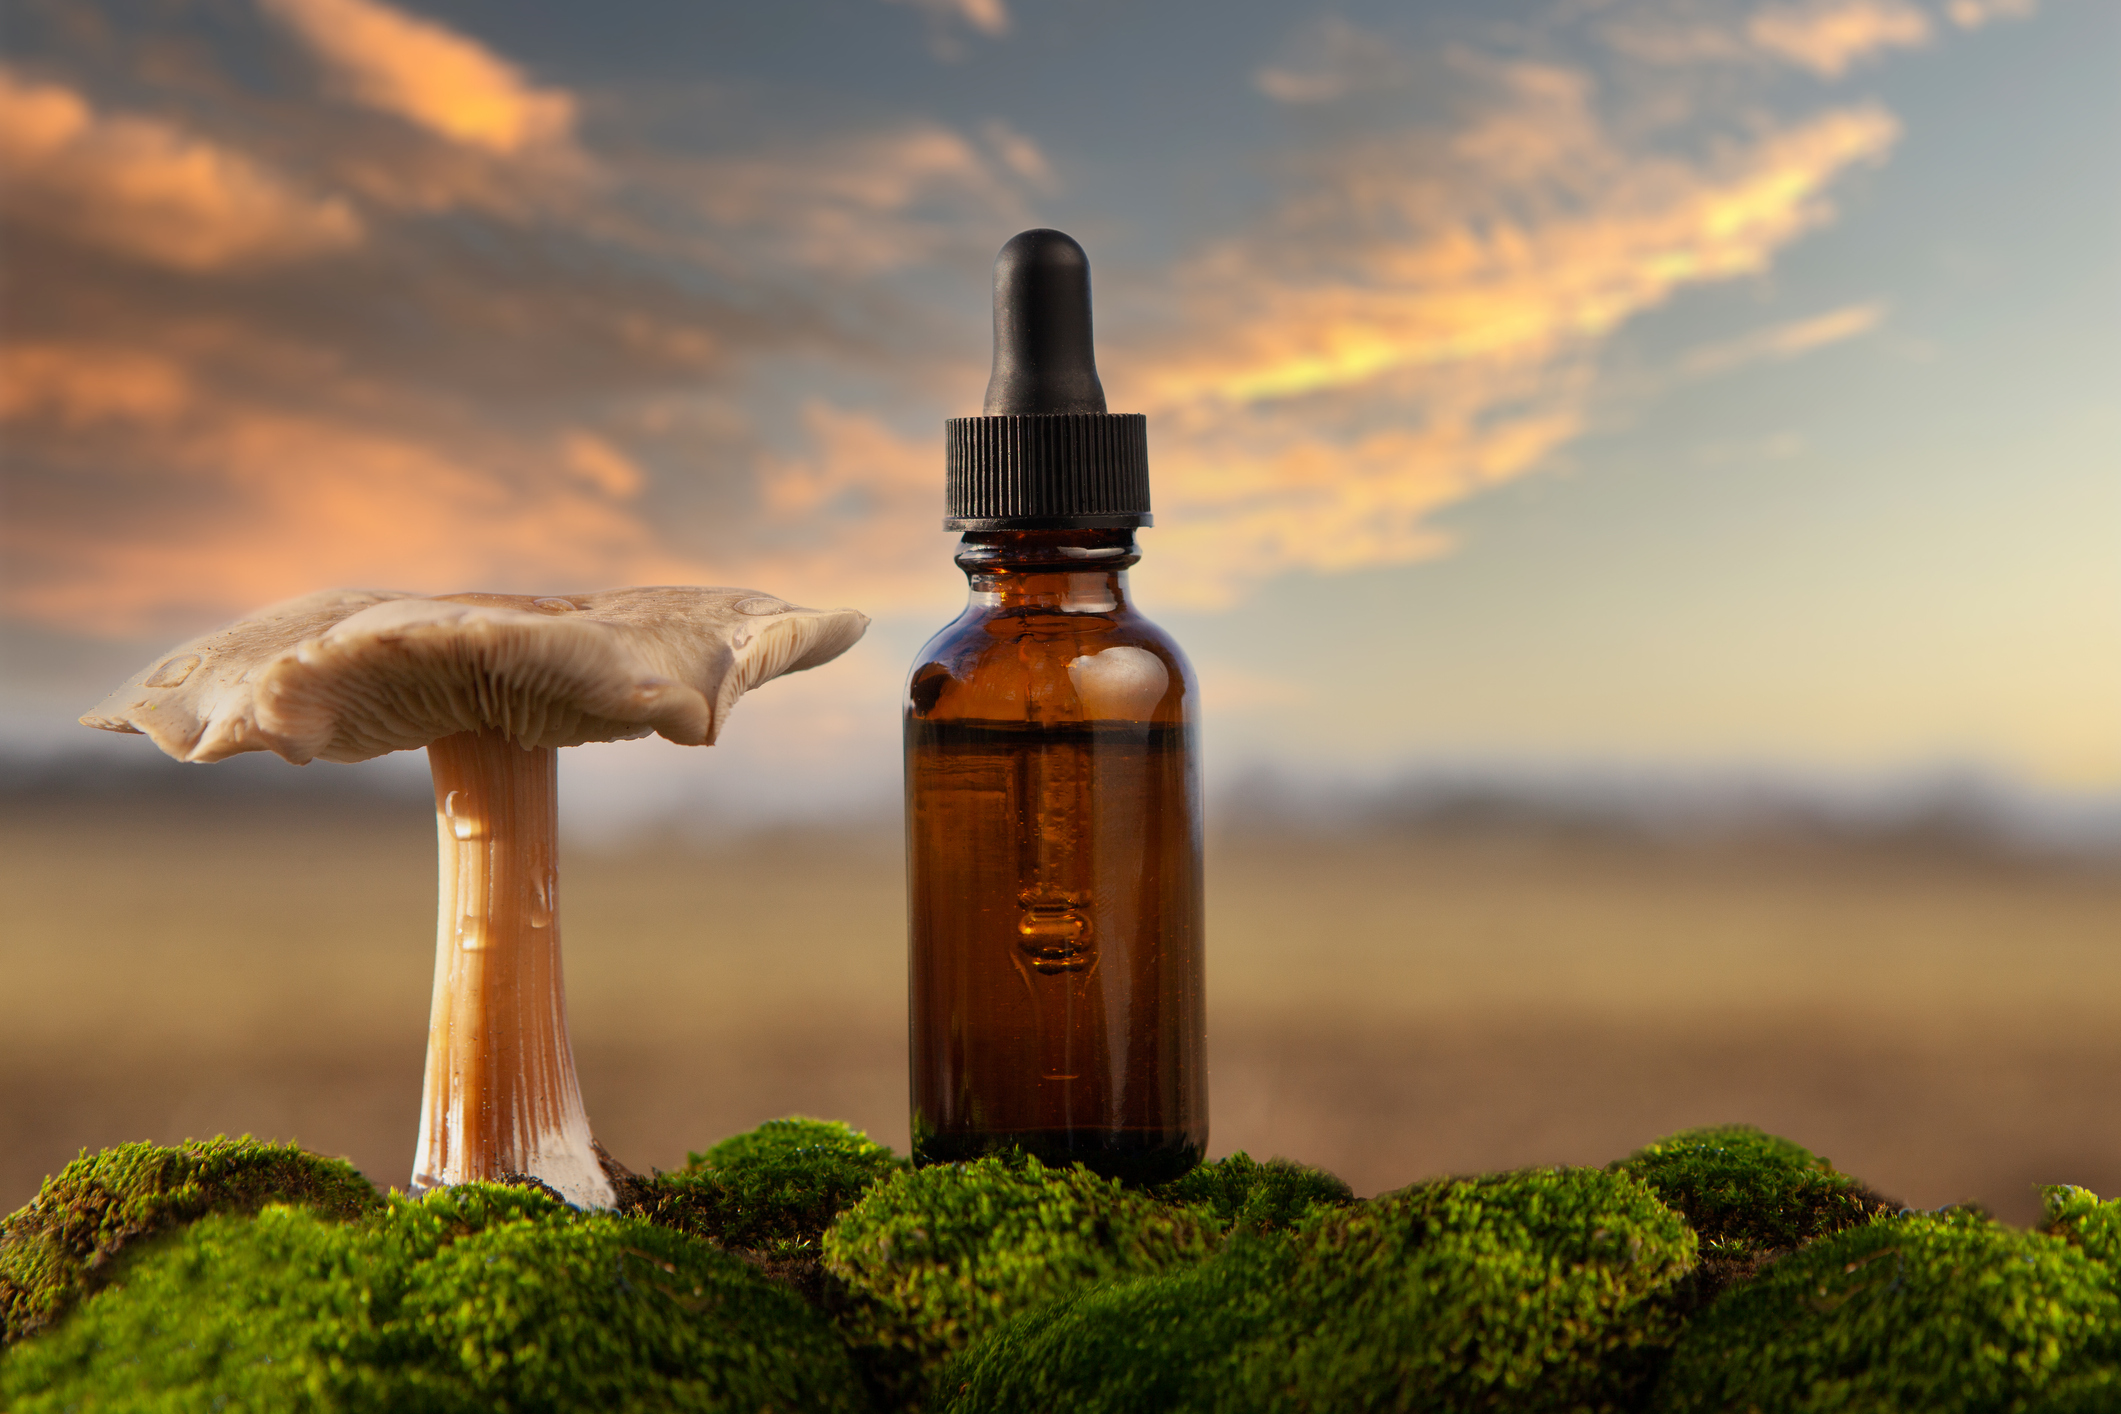 Medicinal mushroom extract or Psychedelic mushrooms. CONCEPT